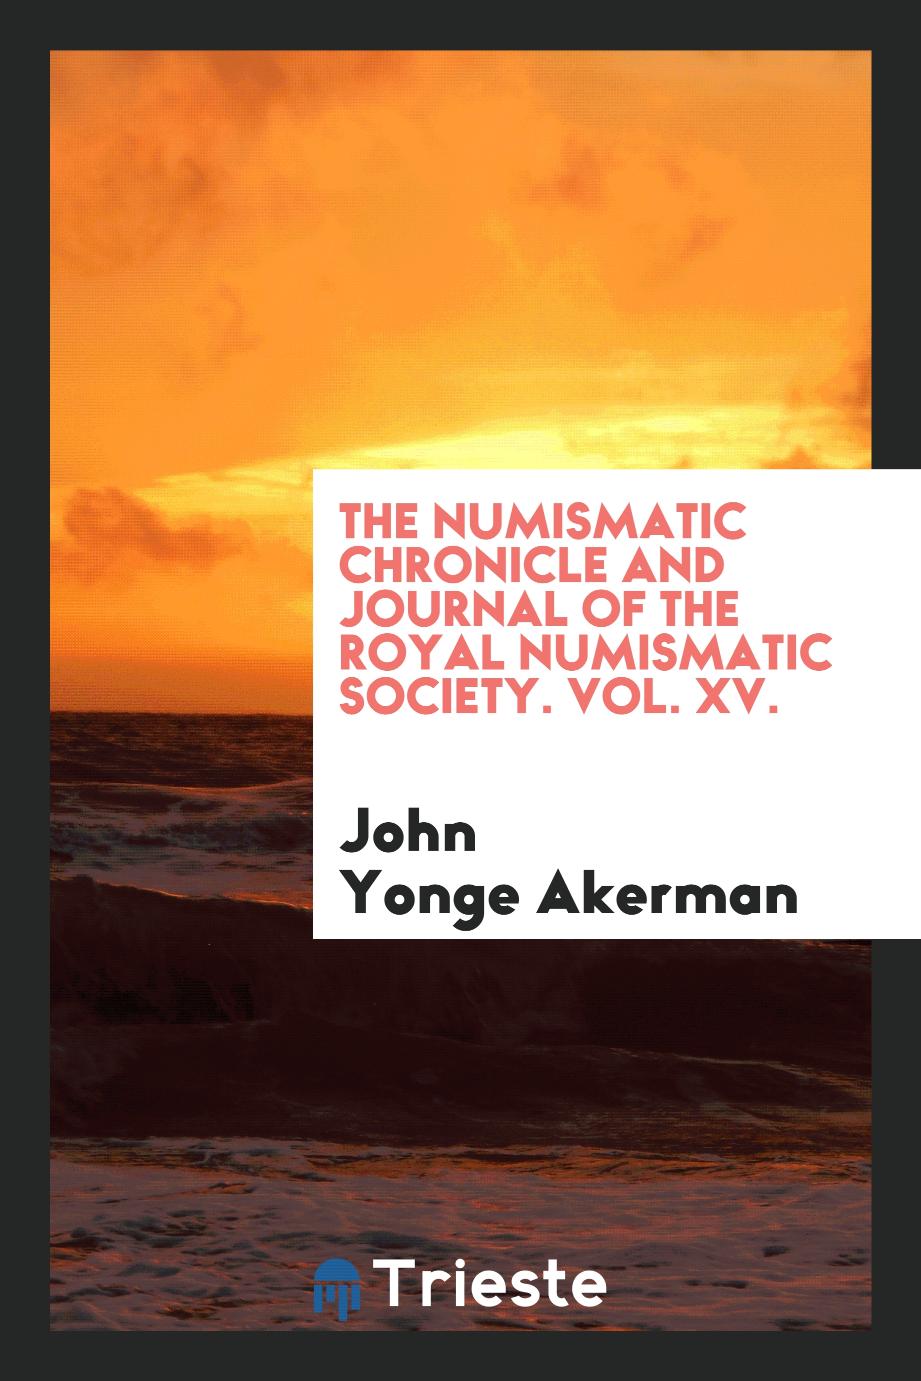 The numismatic chronicle and journal of the Royal Numismatic Society. Vol. XV.